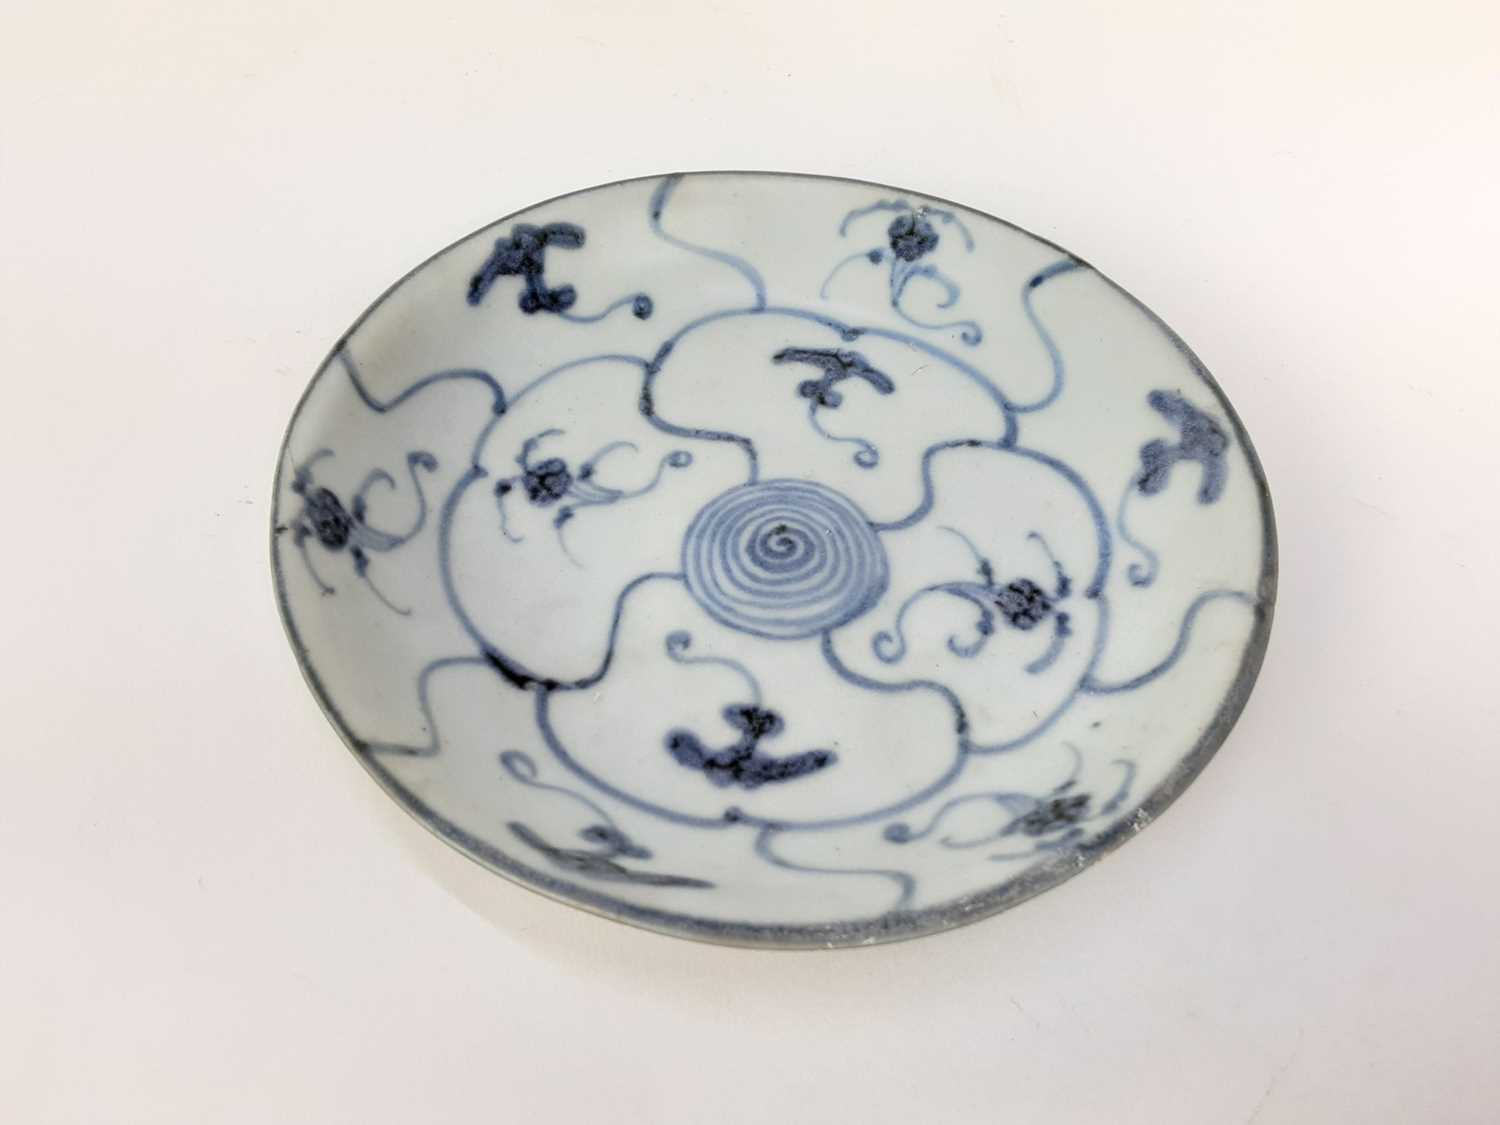 Chinese blue and white export porcelain bowl, late 18th century, painted with landscape scenes... - Image 5 of 6